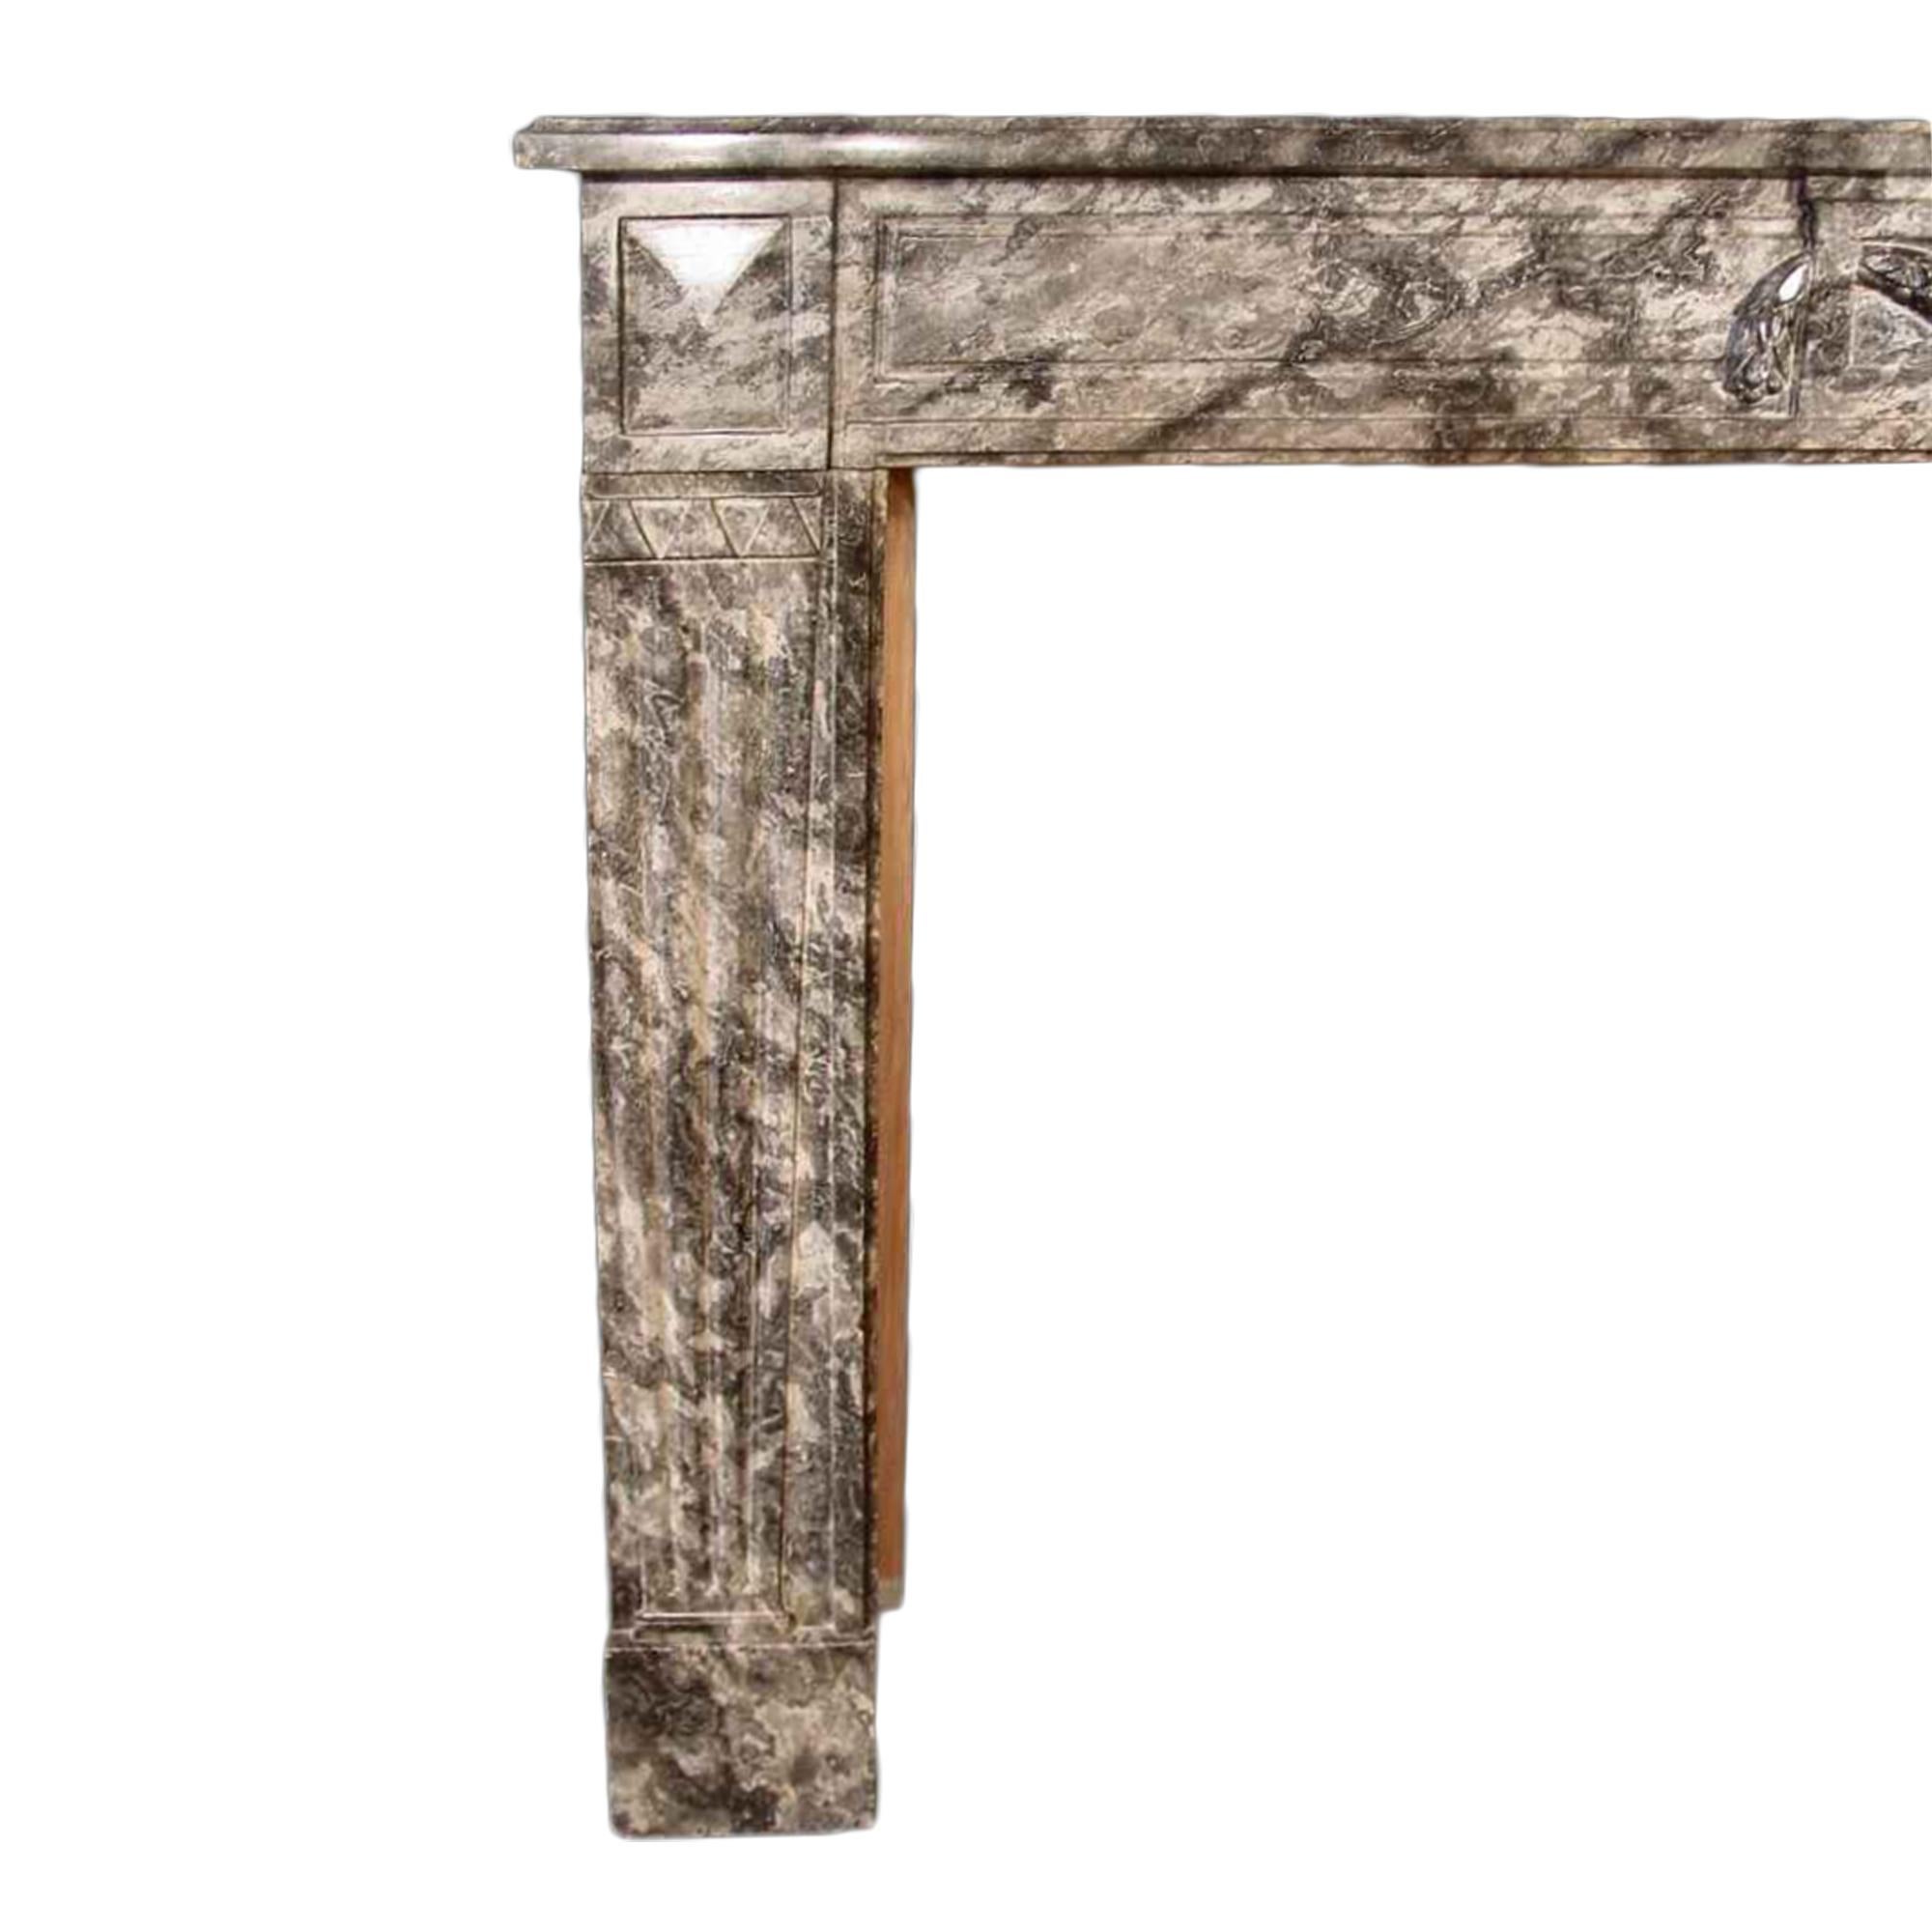 A very important French 19th century Louis XVI st. 'Gris St. Anne' marble mantel. The two solid marble jambs are fluted while the bandeau has a square design on each end and on each side of a richly carved laurel garland in the center. Interior